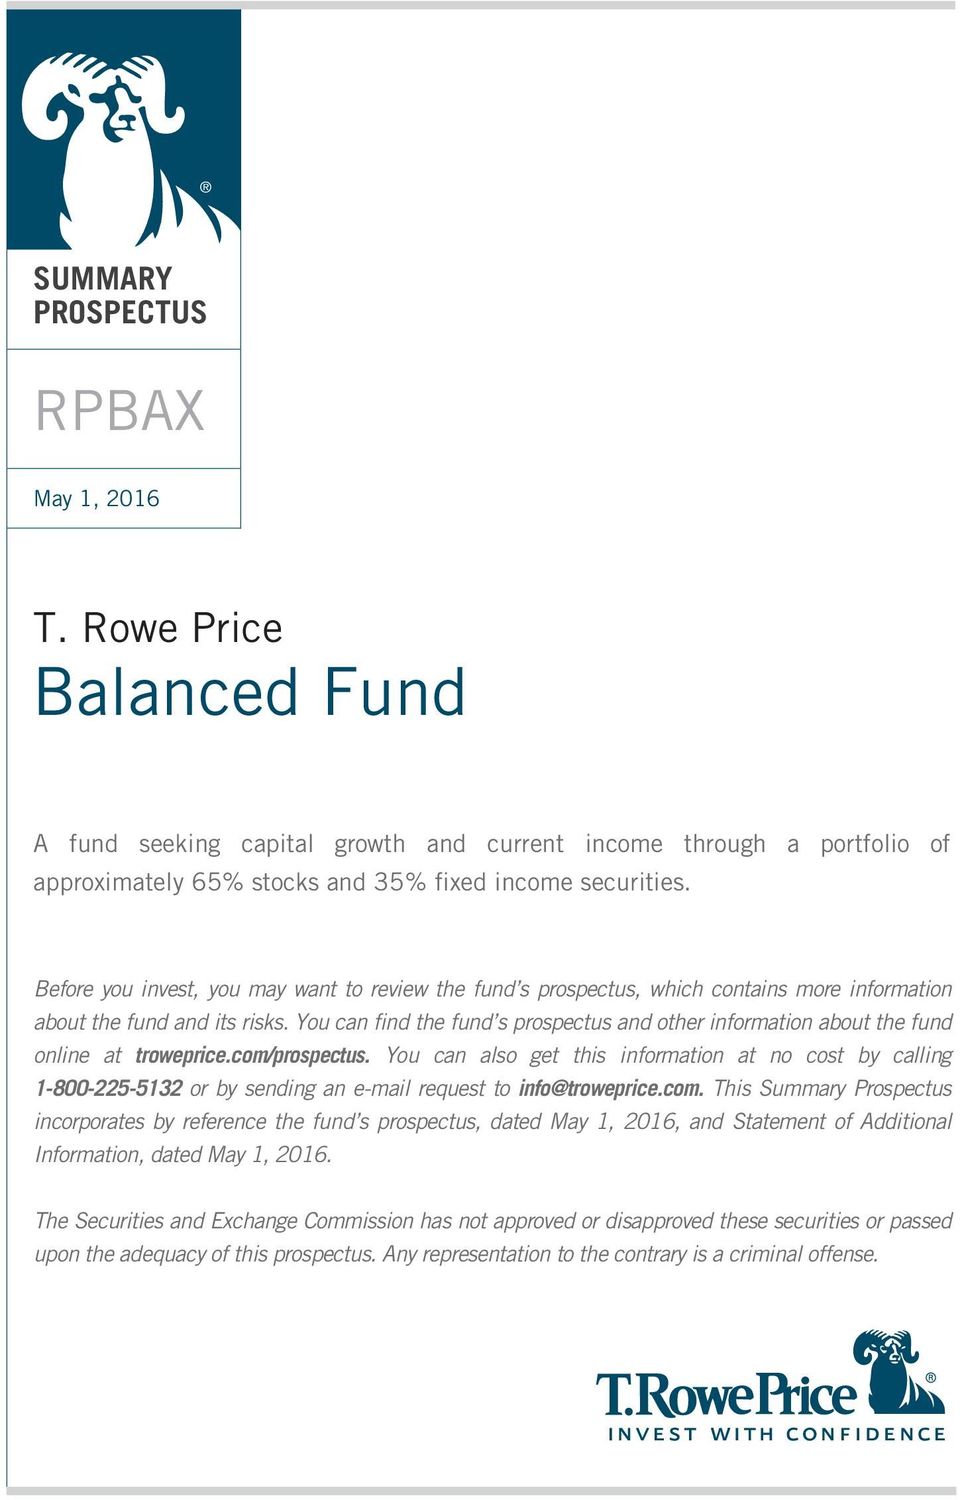 You can find the fund s prospectus and other information about the fund online at troweprice.com/prospectus.